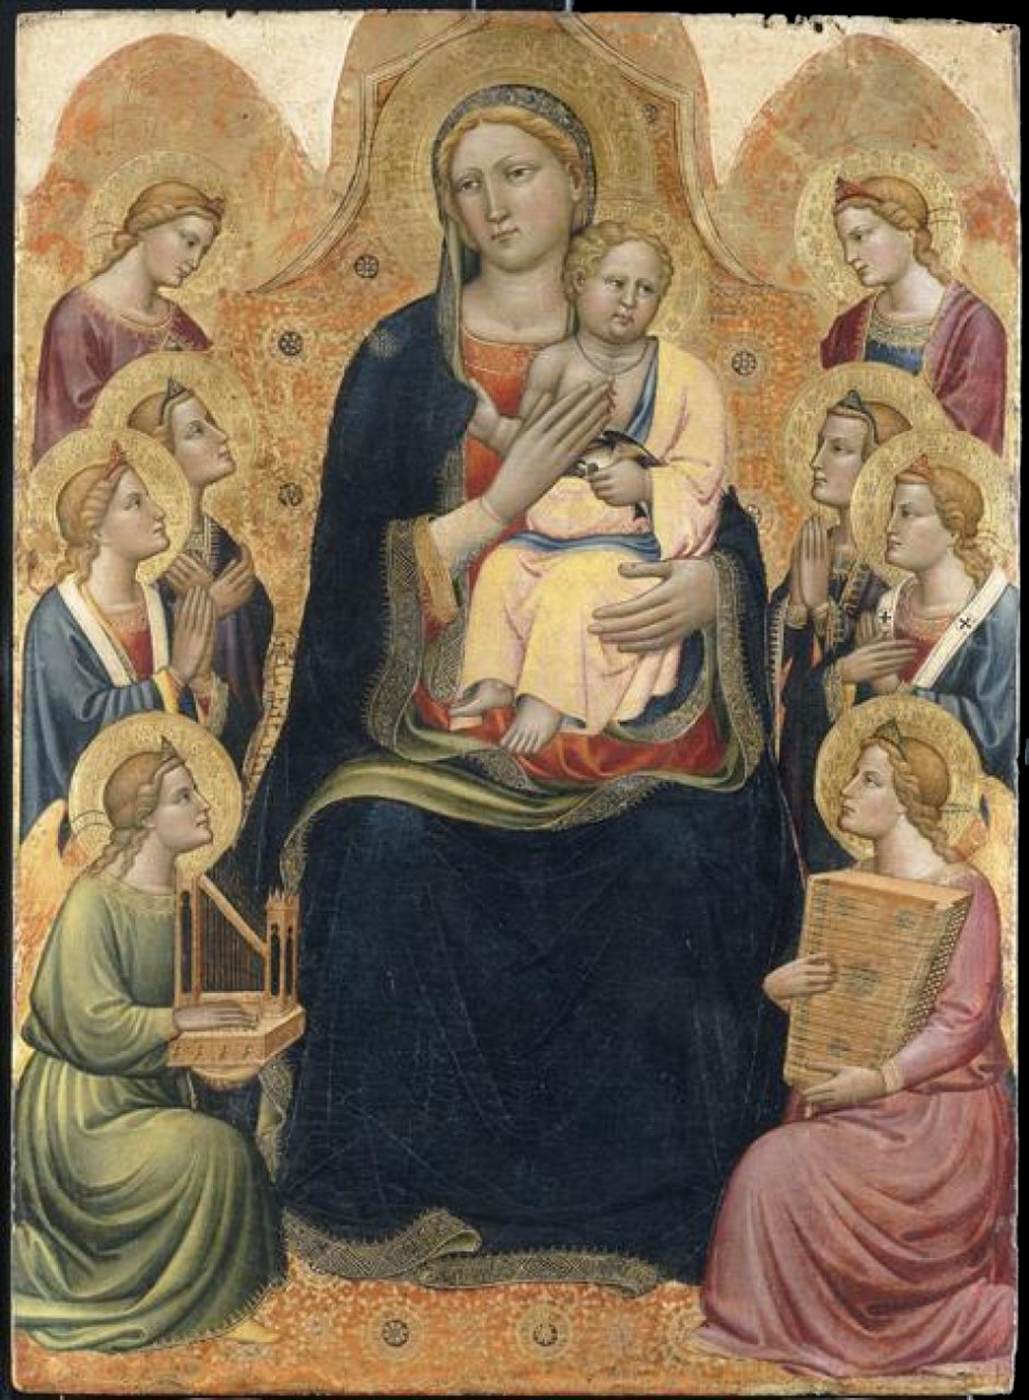 Madonna and Child with Eight Angels